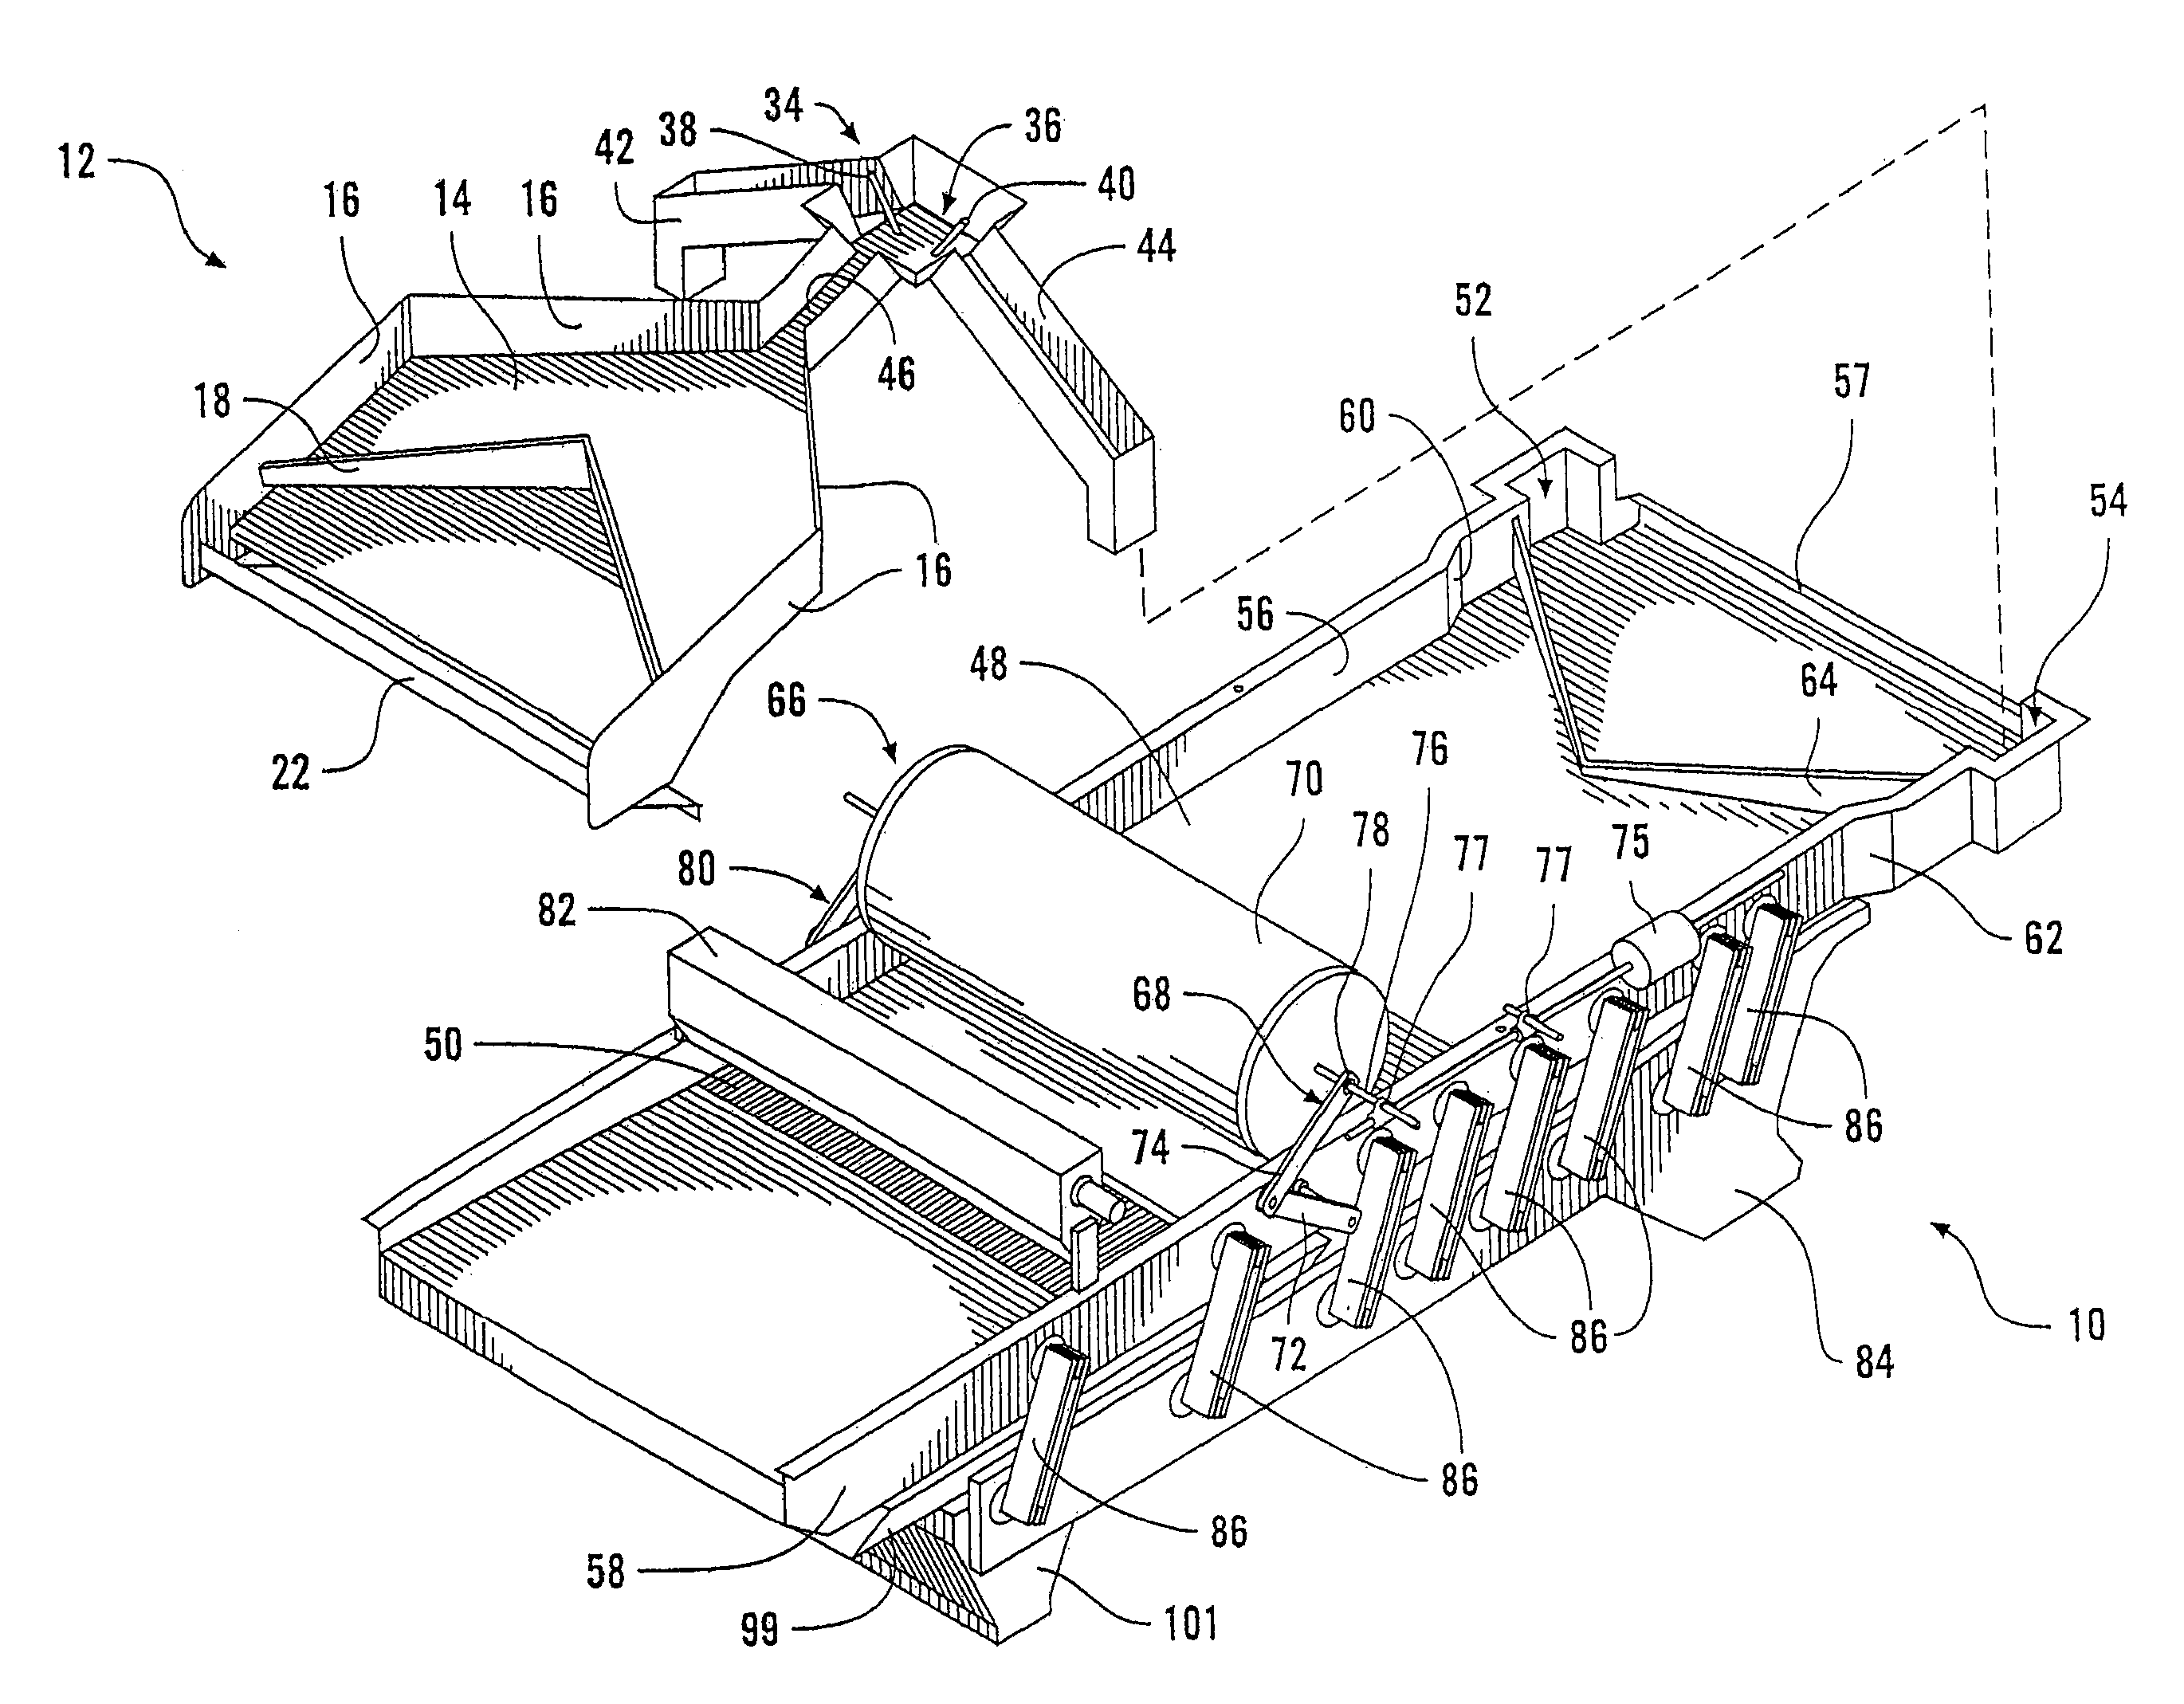 Food coating and topping applicator apparatus and methods of use thereof